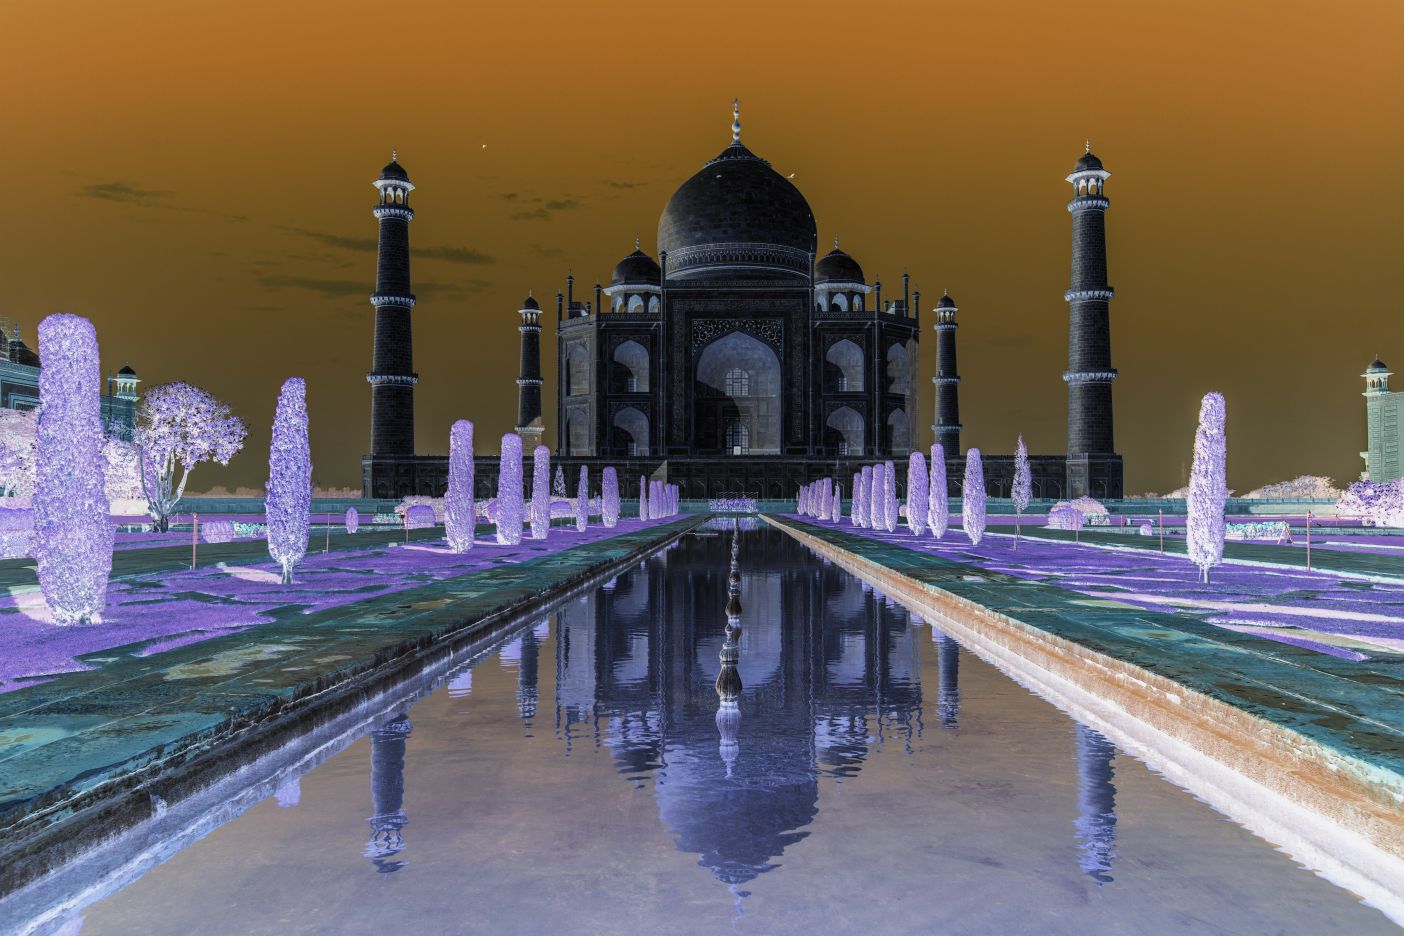 A picture of the Taj Mahal in India appears with the building in dark gray and black, the sky is orange, the small trees lining the rectangular pond that leads to the building are purple, and the sidewalks appear blue-green.  A start timer button appears below the image. once 20 second timer has expired an afterimage of taj mahal picture over a black and white image version same there to be color on with green bushes, yellow grass, red-orange brick sidewalks, blue sky.